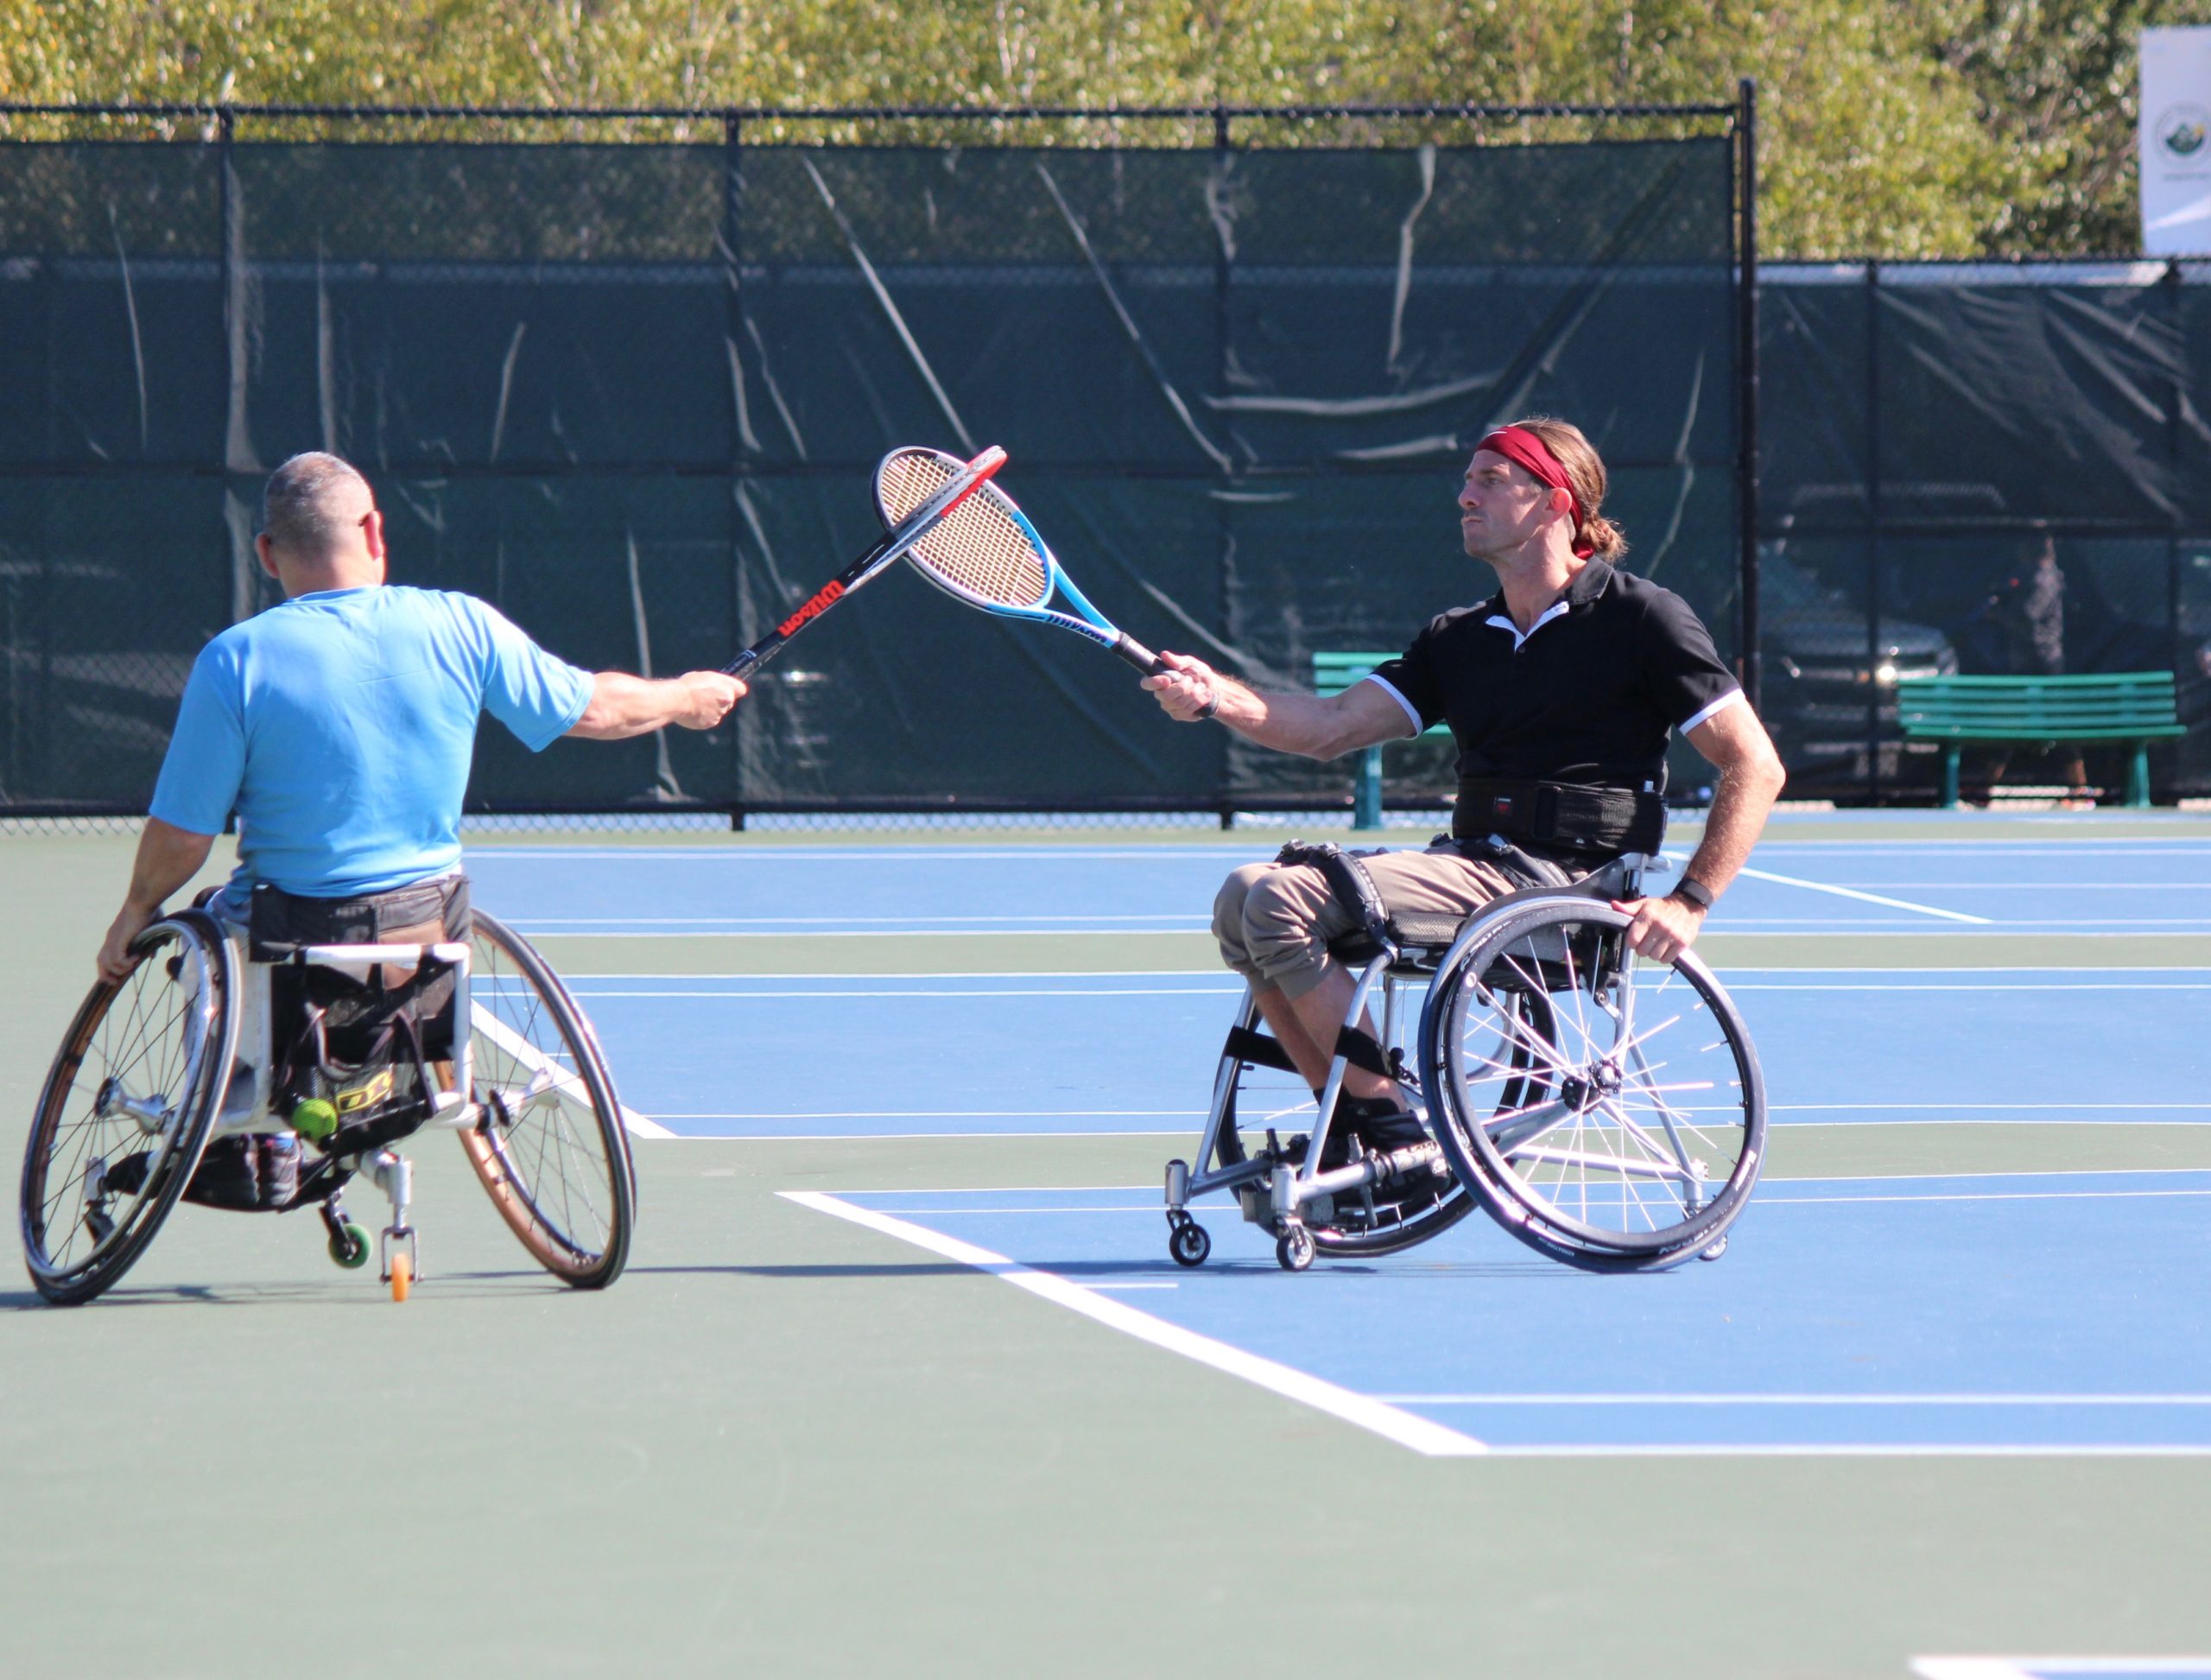 2 wheelchair tennis players celebrating by touching racquets.